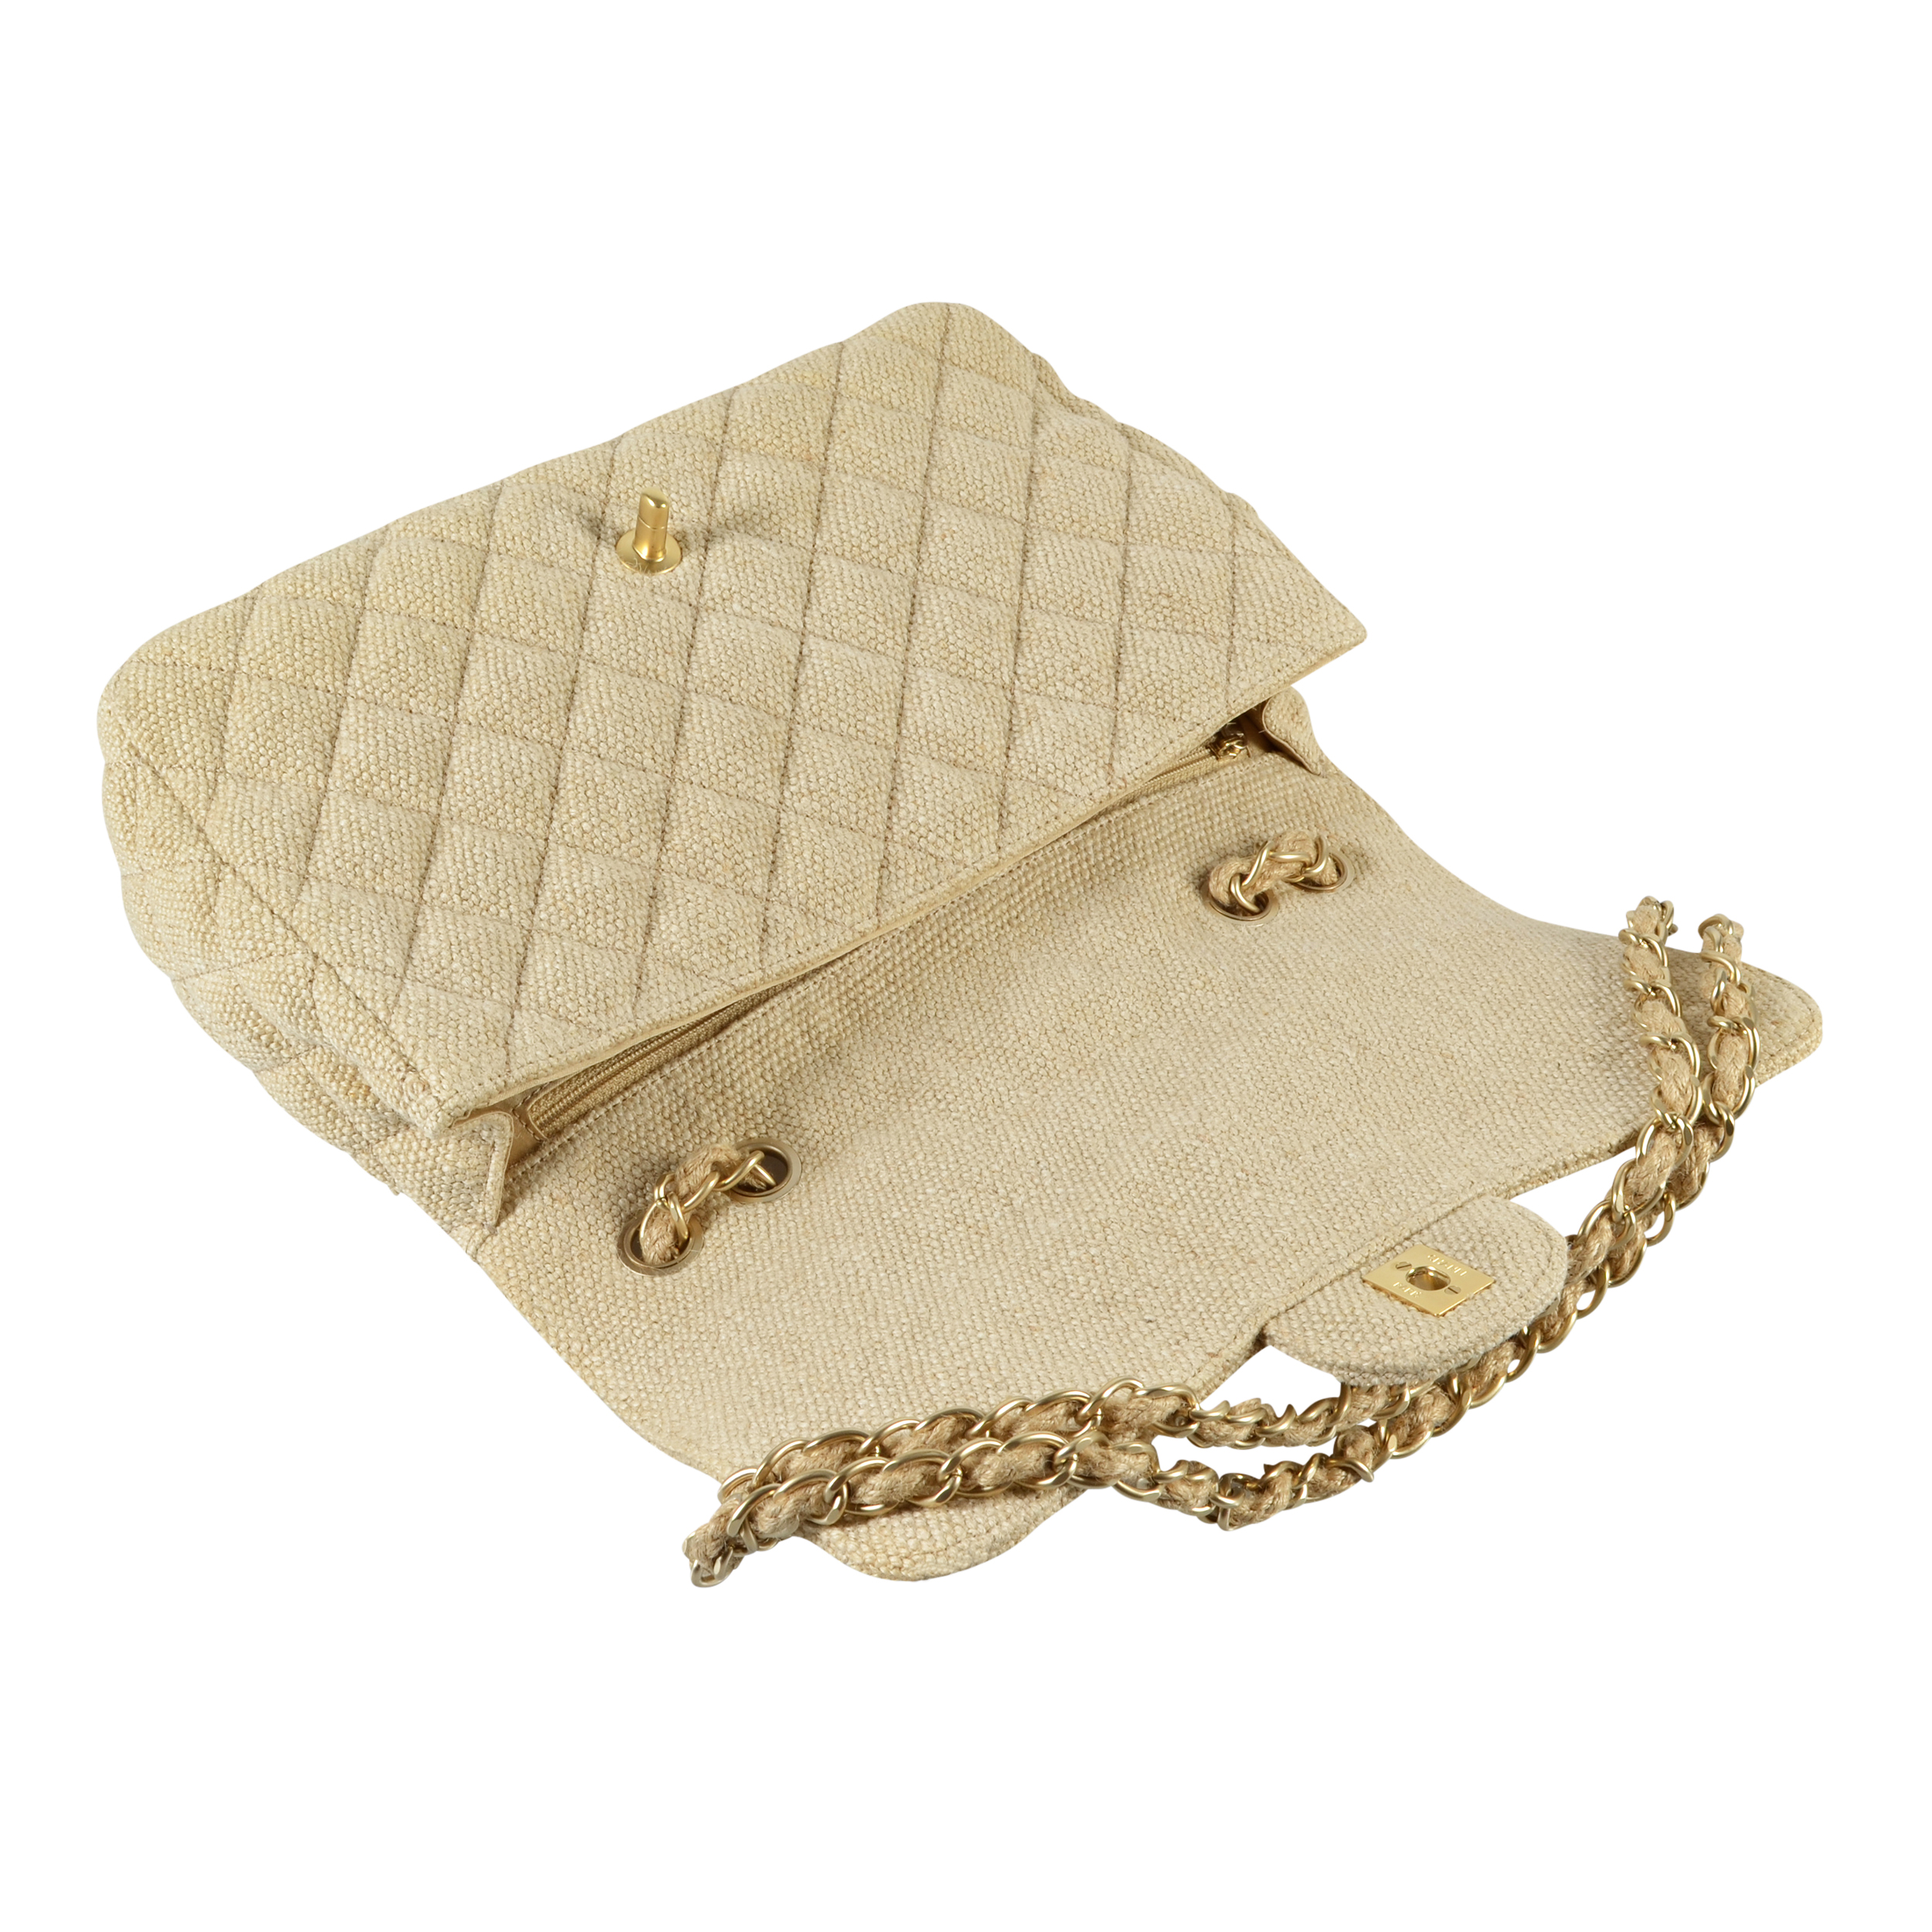 chanel handbags and prices